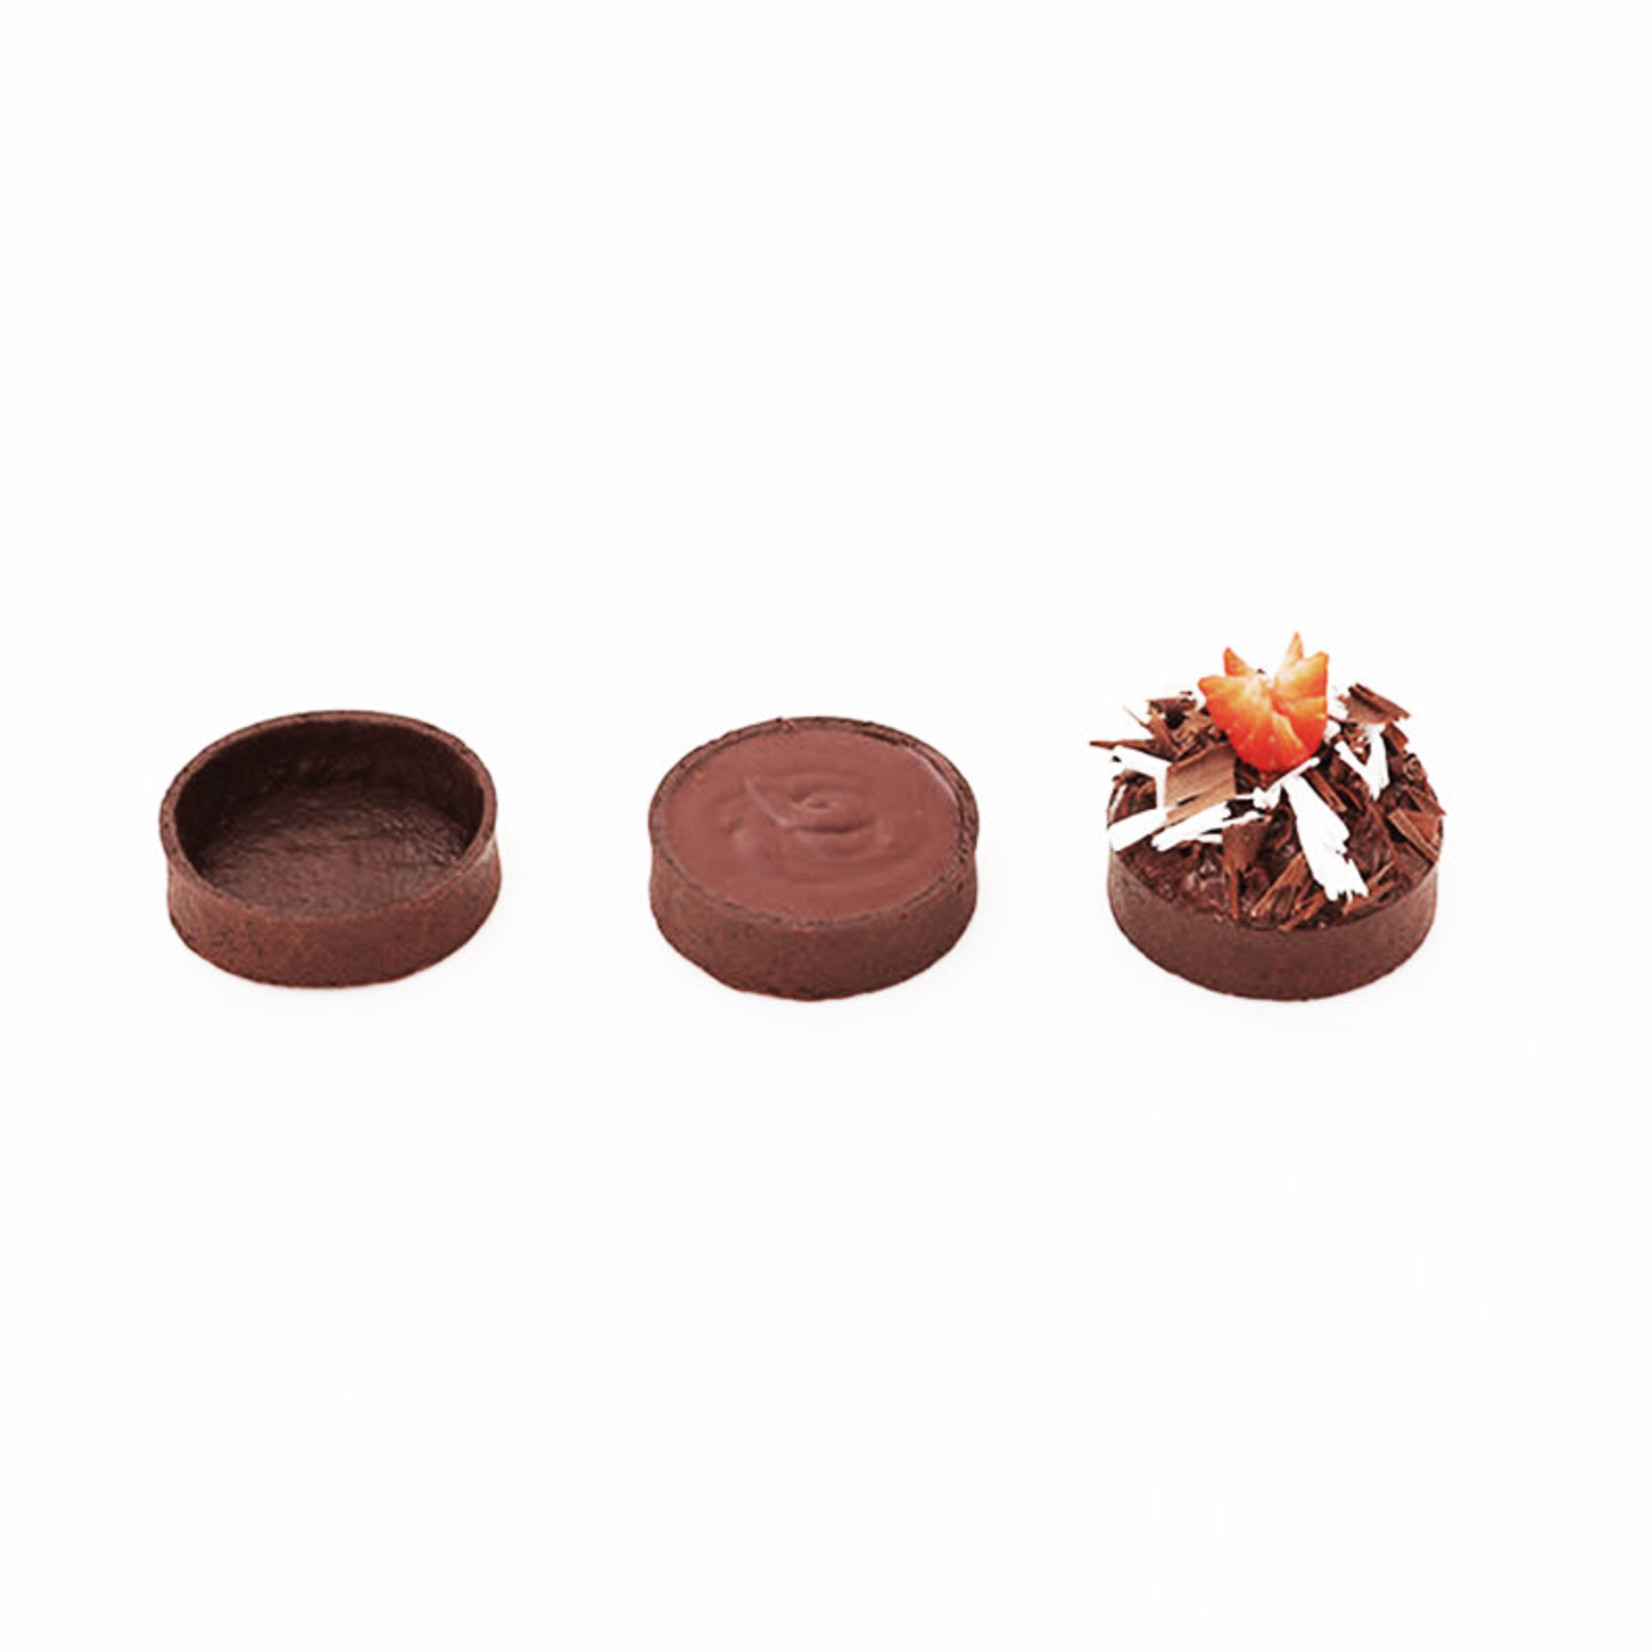 Le Chic Patissier Le Chic Patissier - Tart shell, Chocolate round - 2'' (100ct), 78449